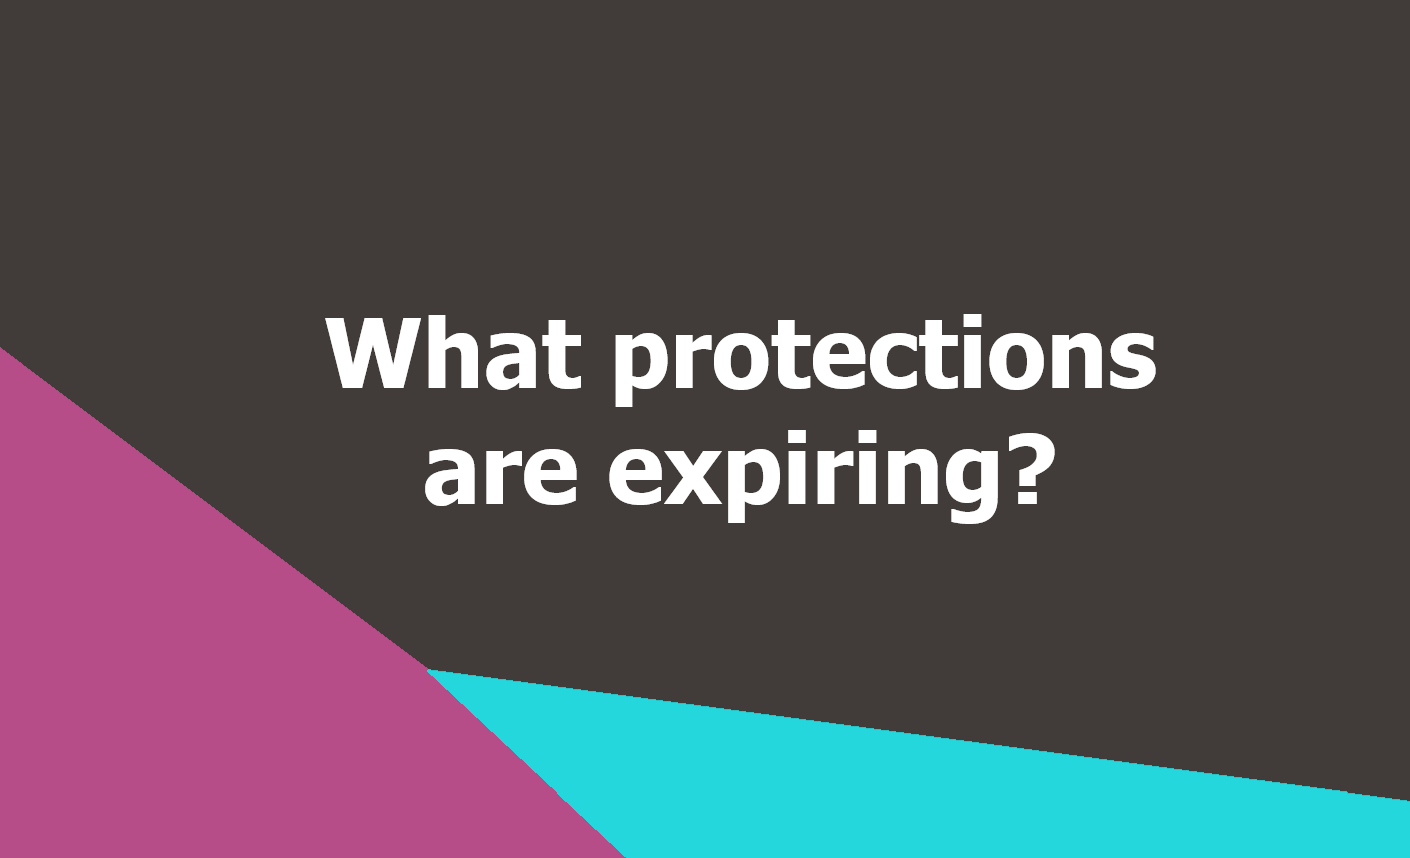 What protections are expiring?